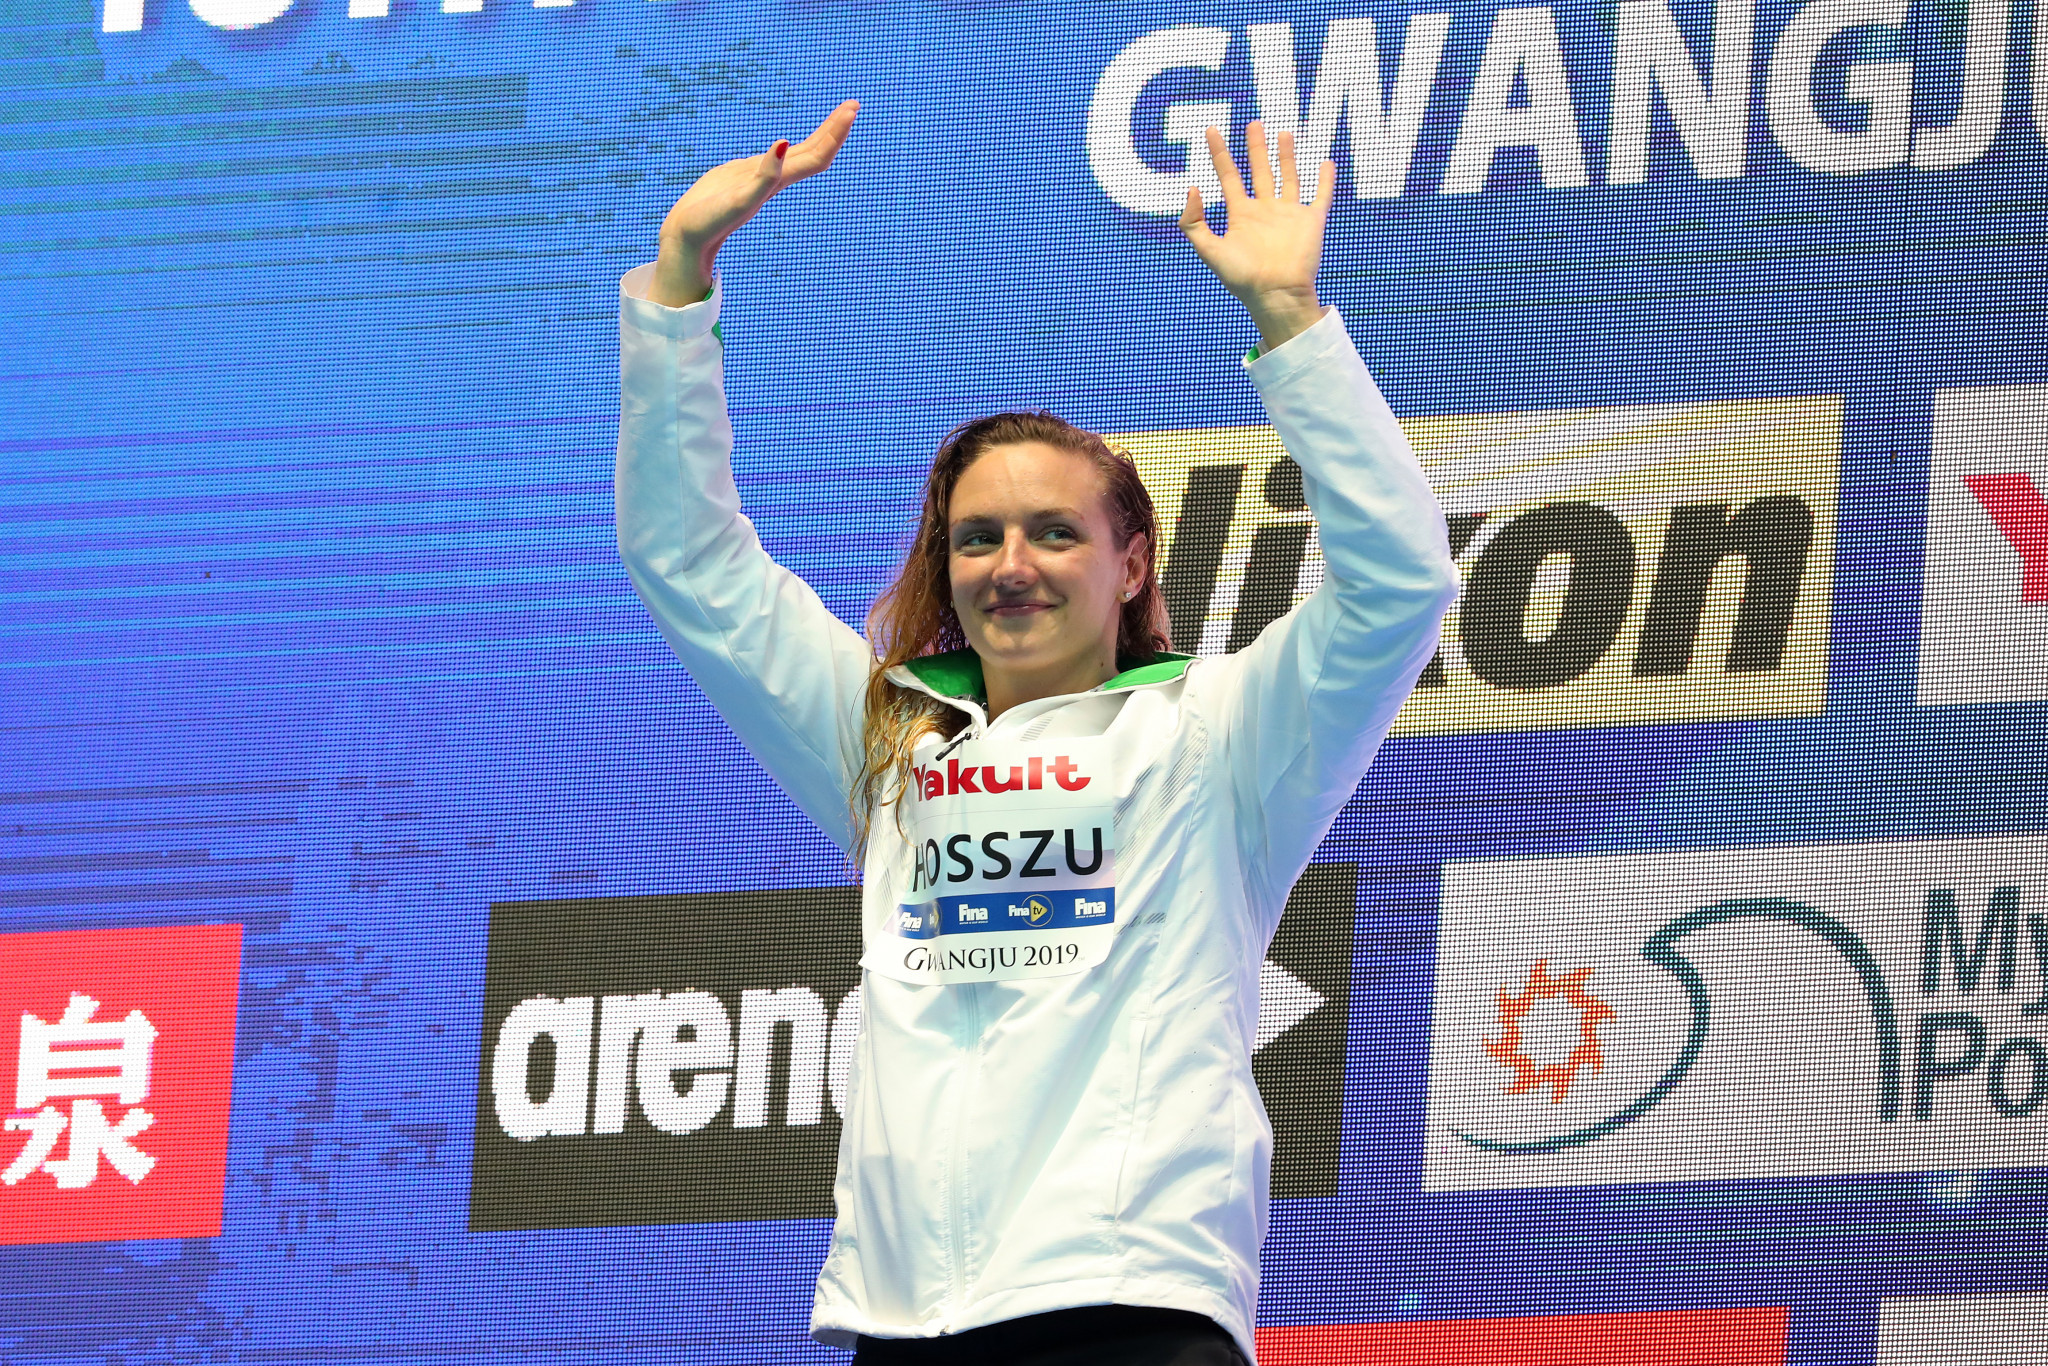 Three-times Olympic champion and multiple World Championships gold medallist Katinka Hosszú was among a group of swimmers who pressured Tamás Gyárfás to resign from his role as Hungarian Swimming Federation President in 2016 ©Getty Images

